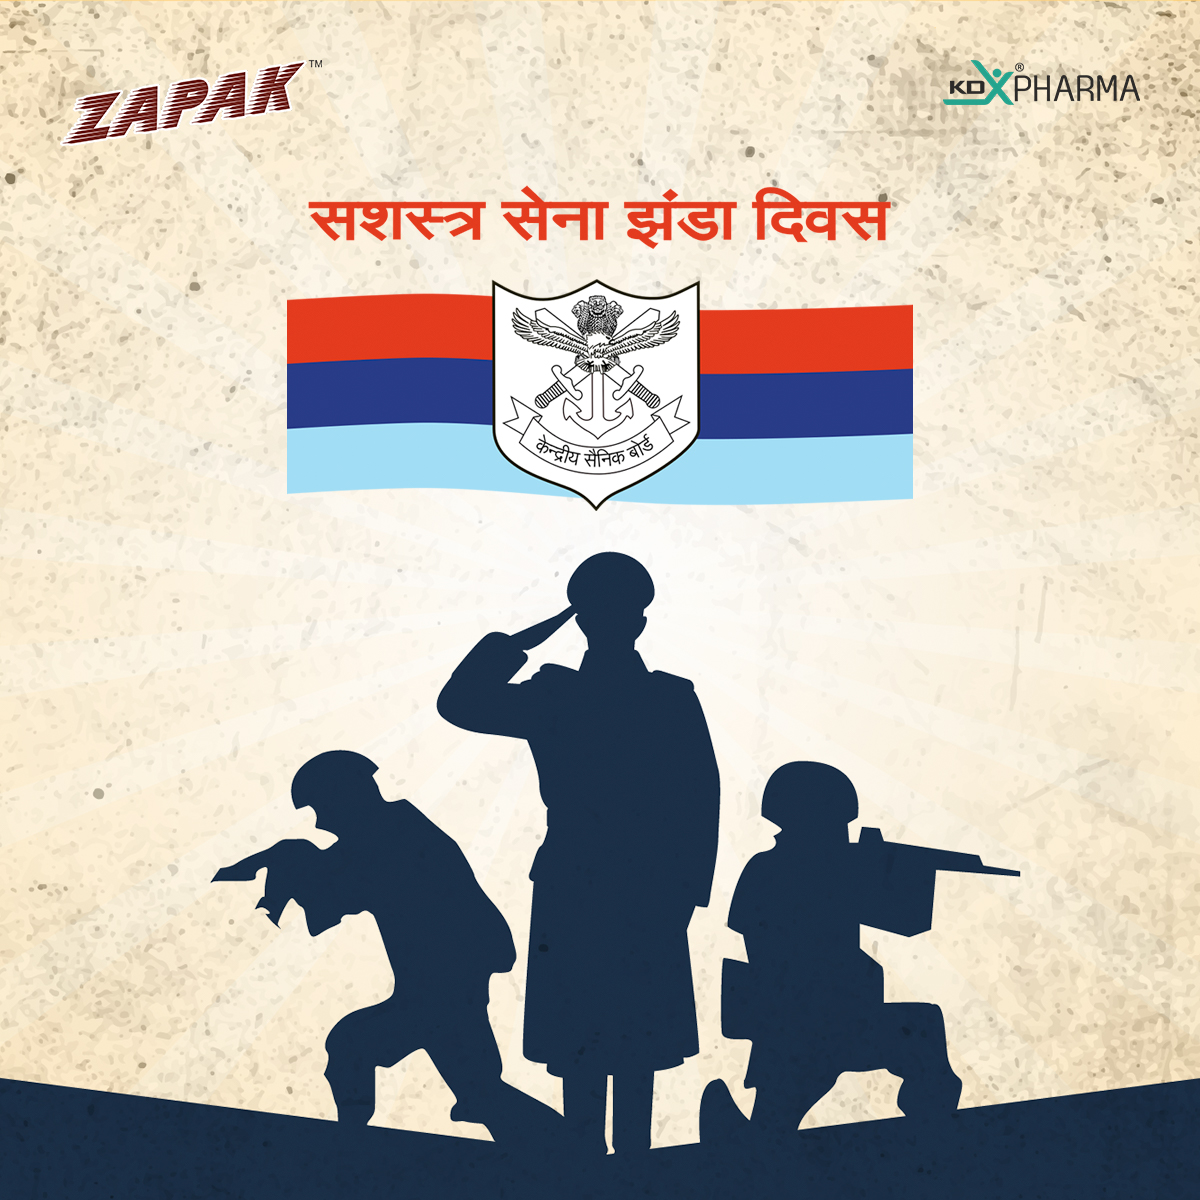 “We have always been safe when they are around. Thanking our armed forces on Indian Armed Forces Flag Day.”

Happy Indian Armed forces flag day

#IndianArmedForcesFlagDay #indianarmedforcesflag #indianarmedforces #IndianArmyPeoplesArmy #tuesdayvibe #zapaksesaaf #zapakchurna